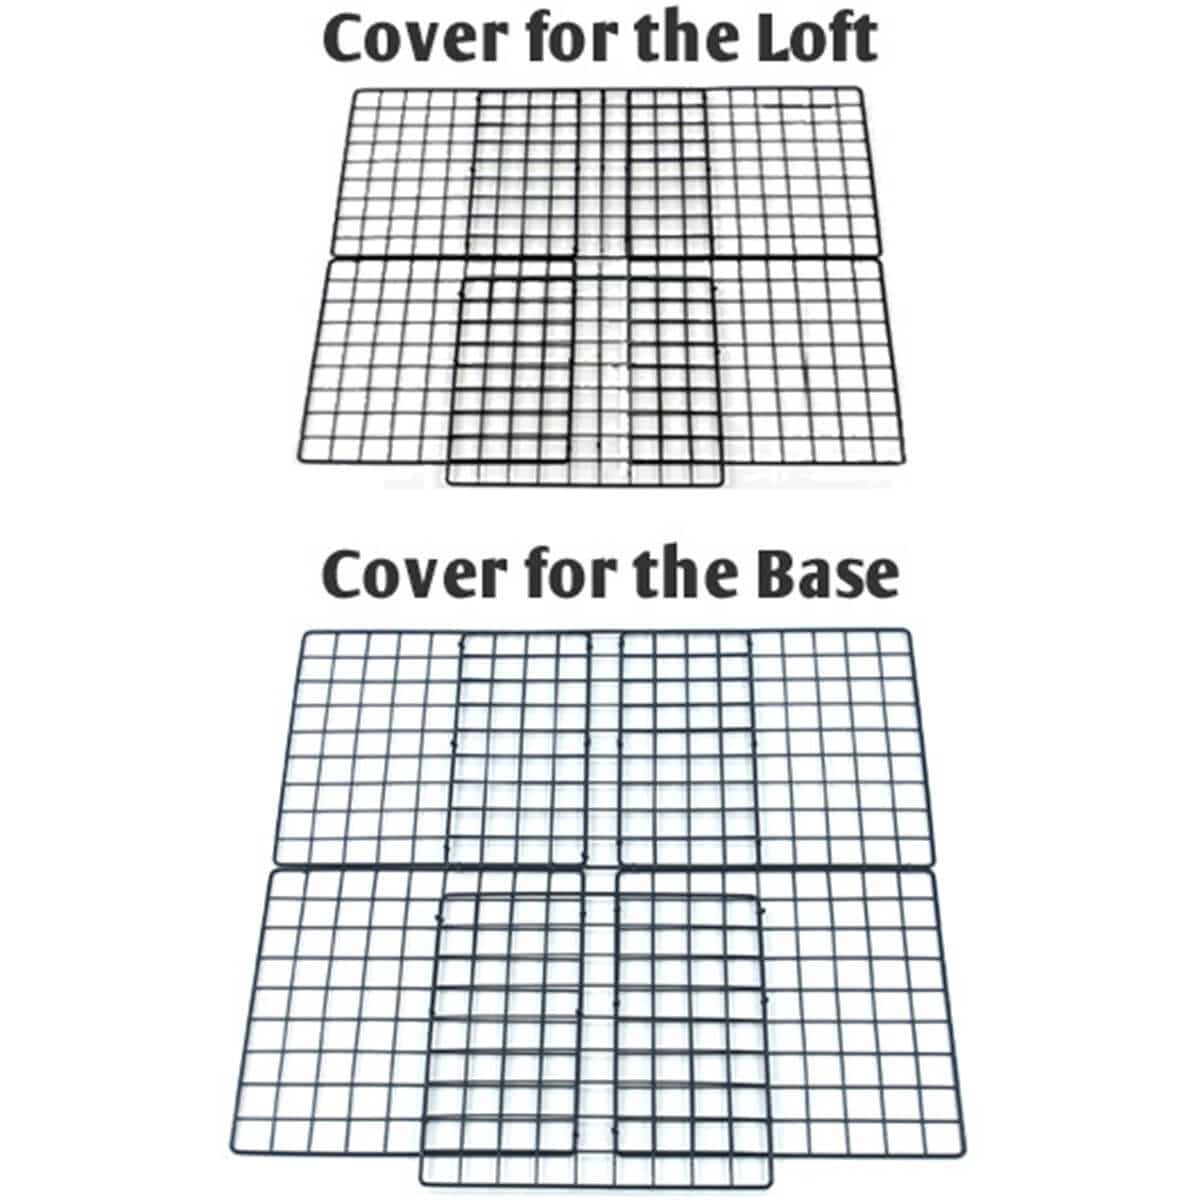 How to lay your grids out for a large/wide covered C&C guinea pig cage